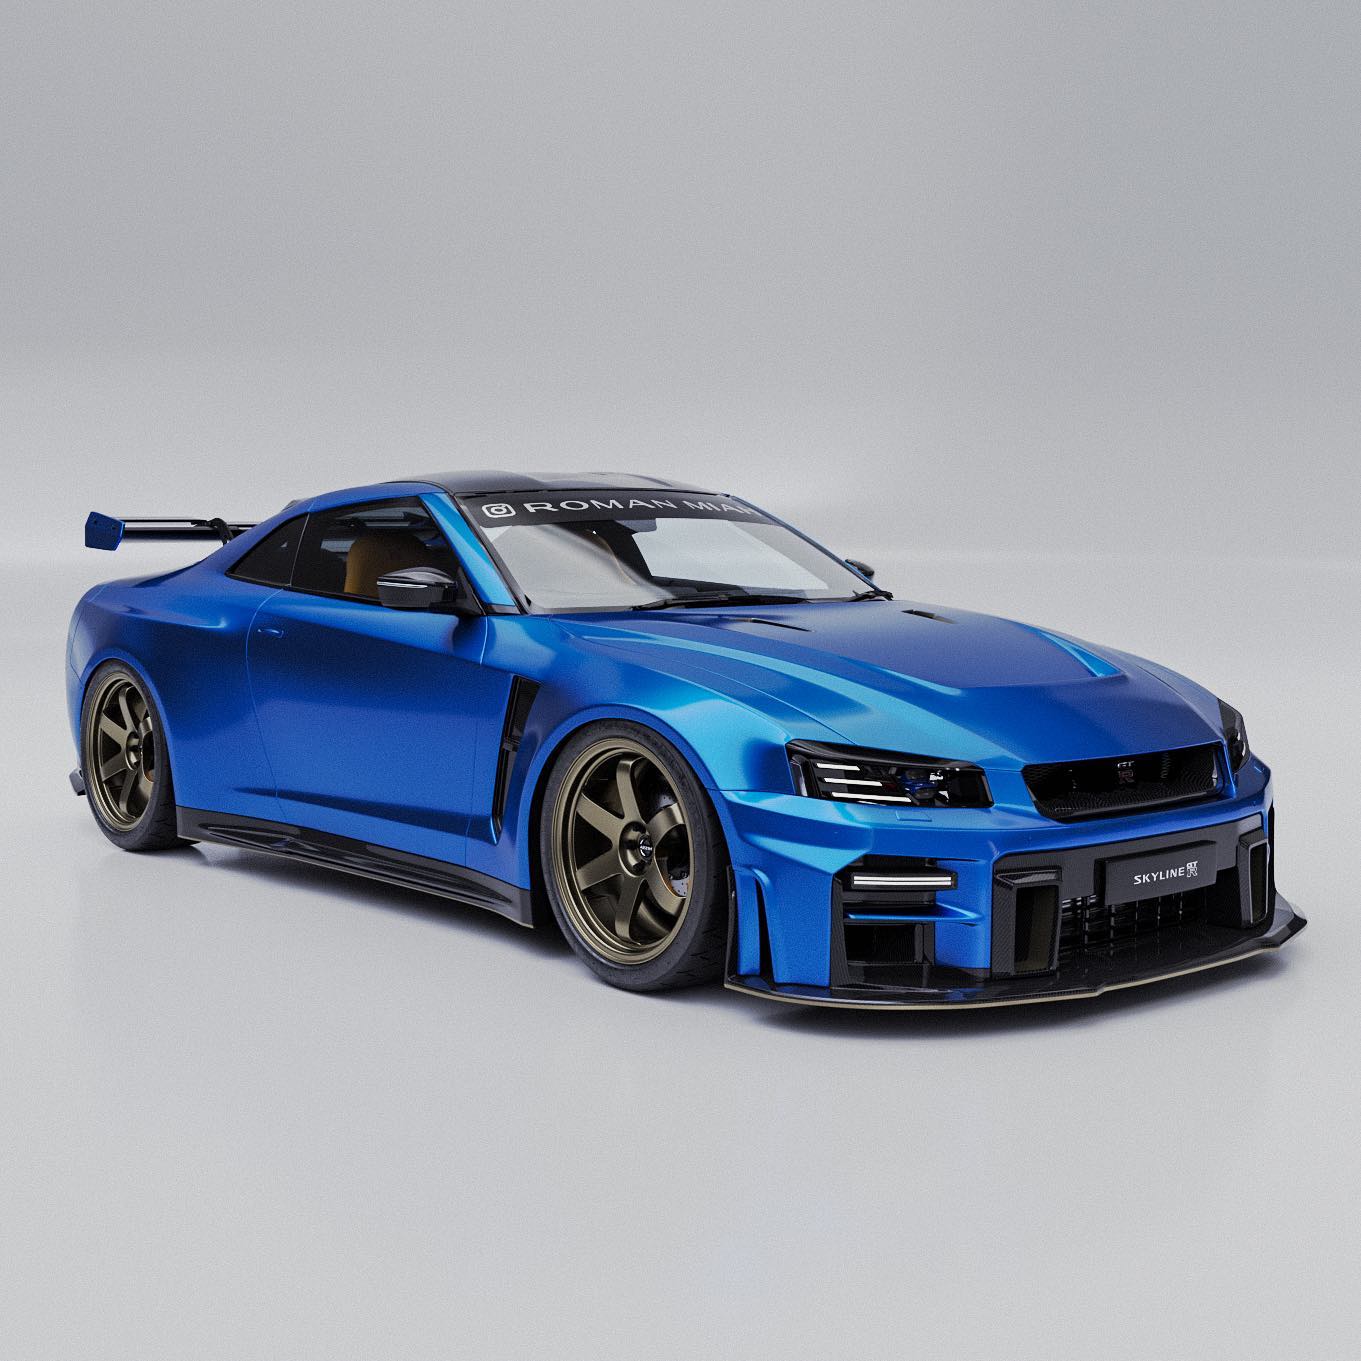 This R36 Nissan GT-R Features Subtle Design Changes, Virtually Reverts to  Skyline Name - autoevolution